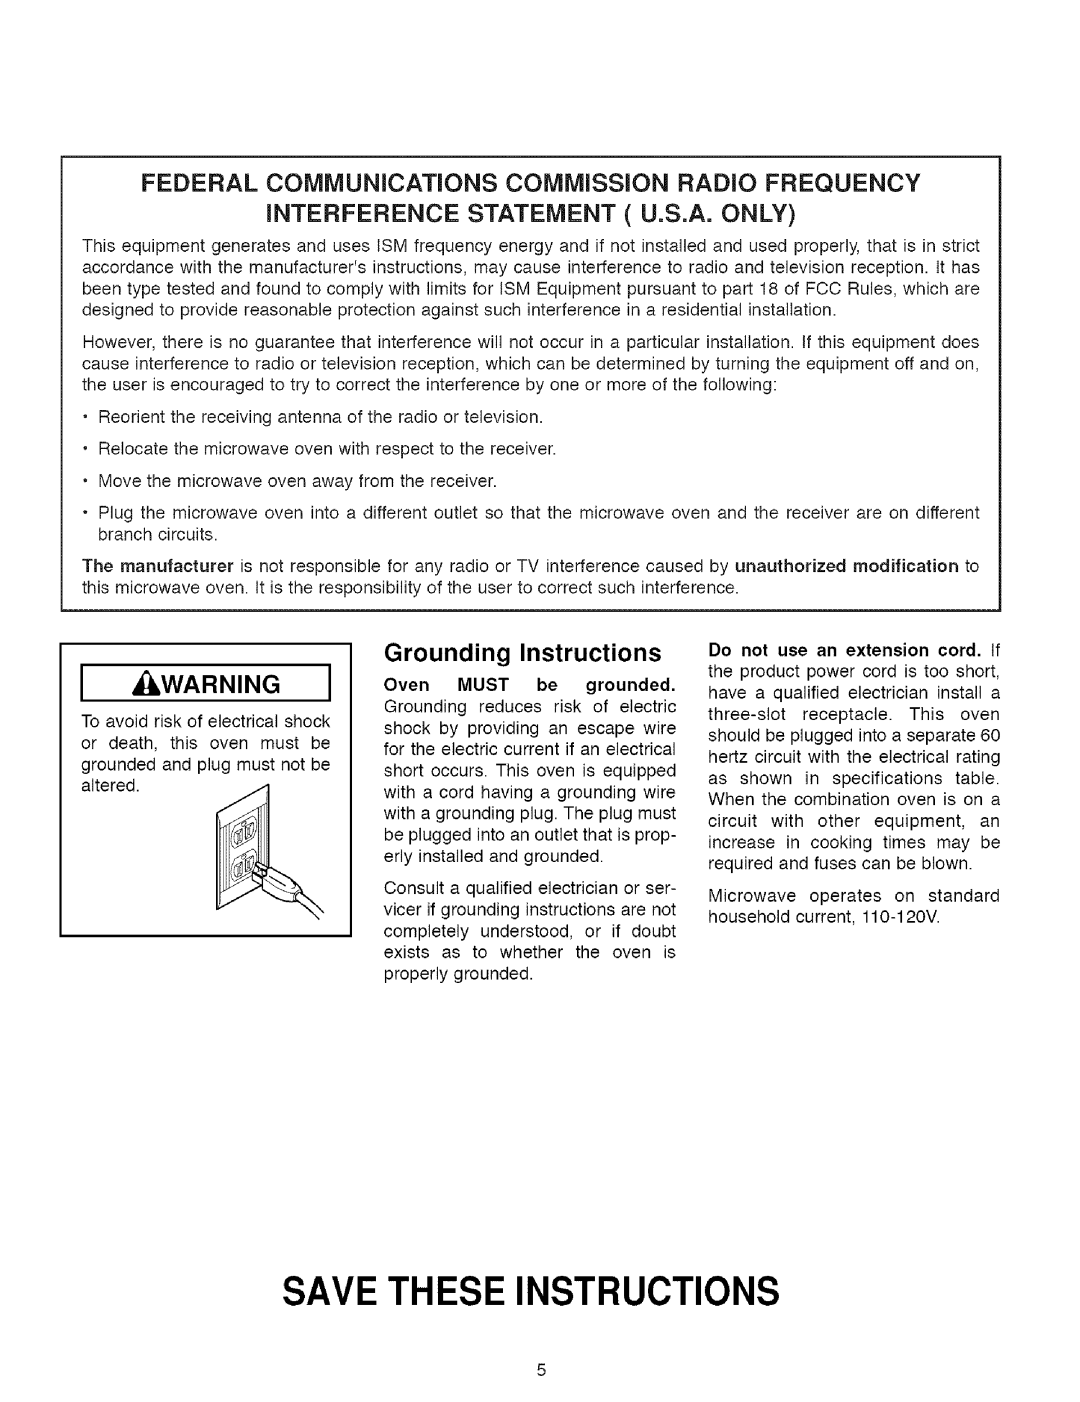 Maytag MMVS156AA owner manual iNTERFERENCE STATEMENT U.S.A. ONLY, Grounding Instructions, Save These Instructions 